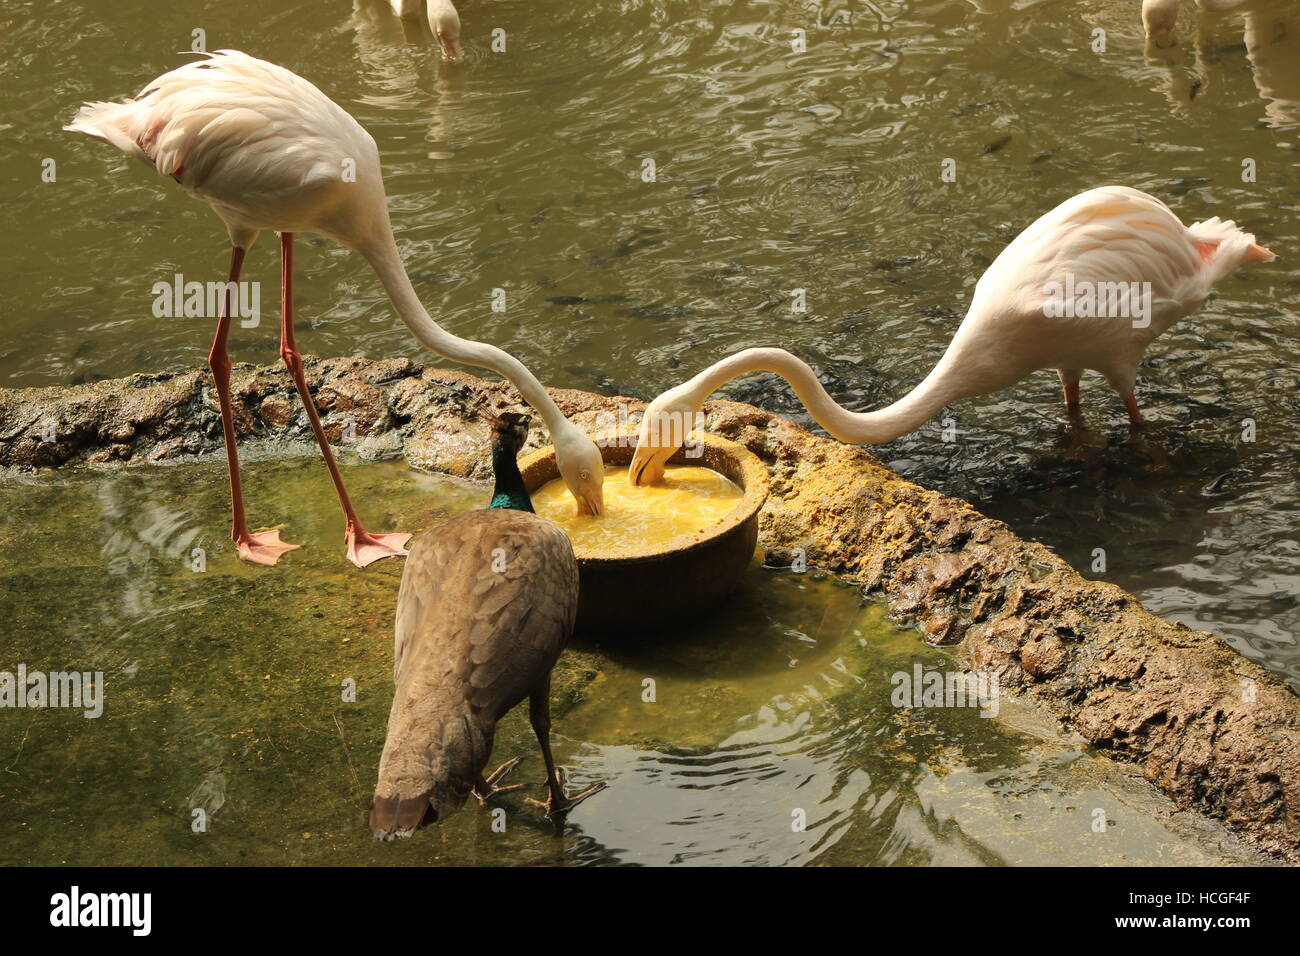 Flamingo food in a zoo shared by Peacock. Stock Photo